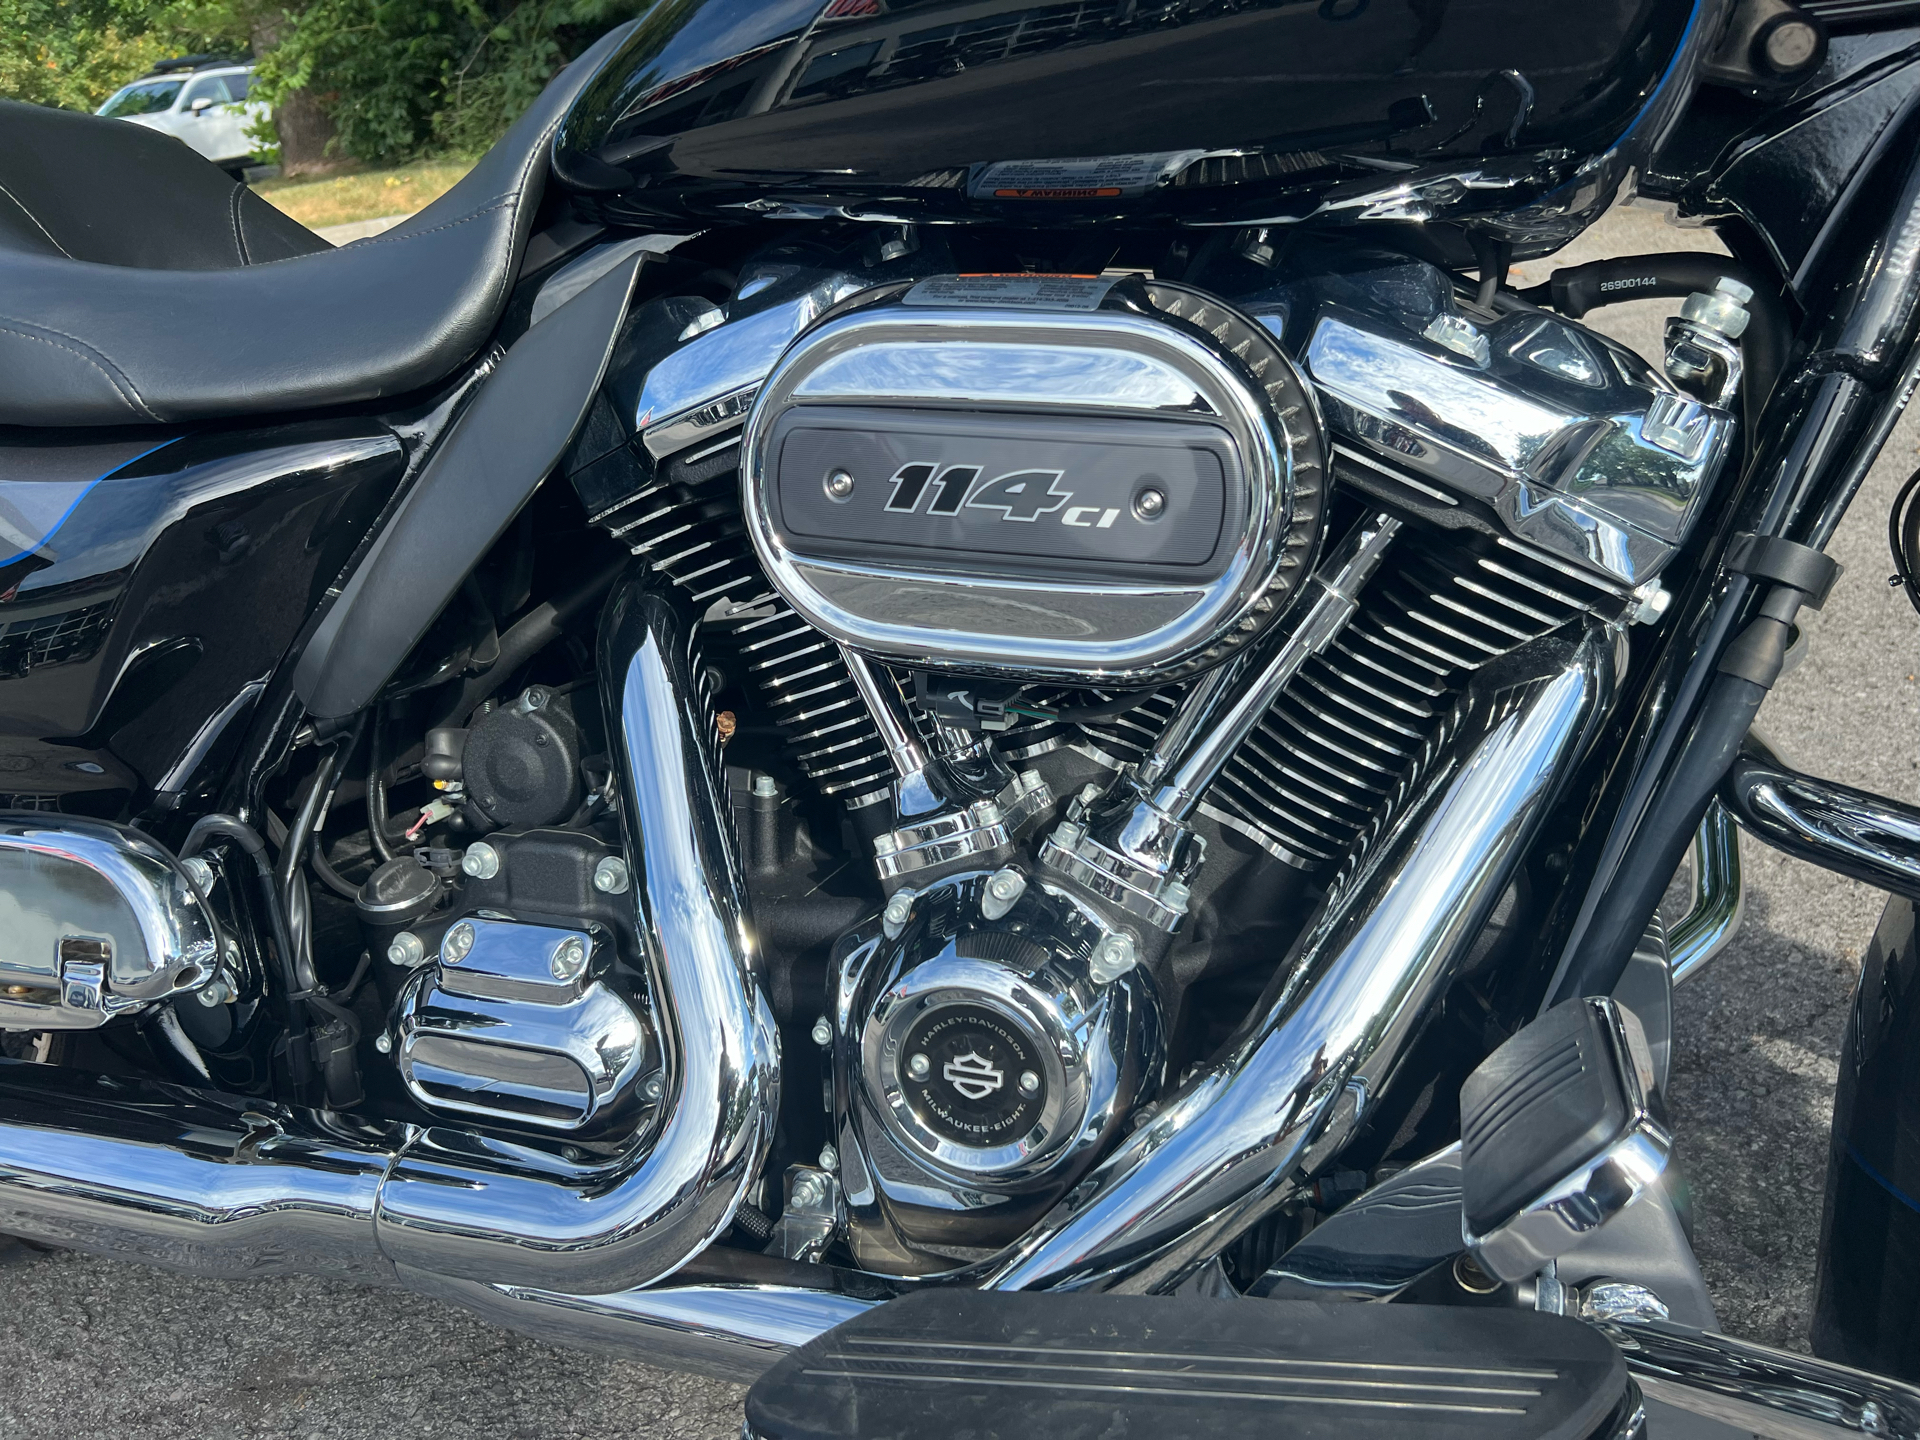 2021 Harley-Davidson Street Glide® Special in Franklin, Tennessee - Photo 2